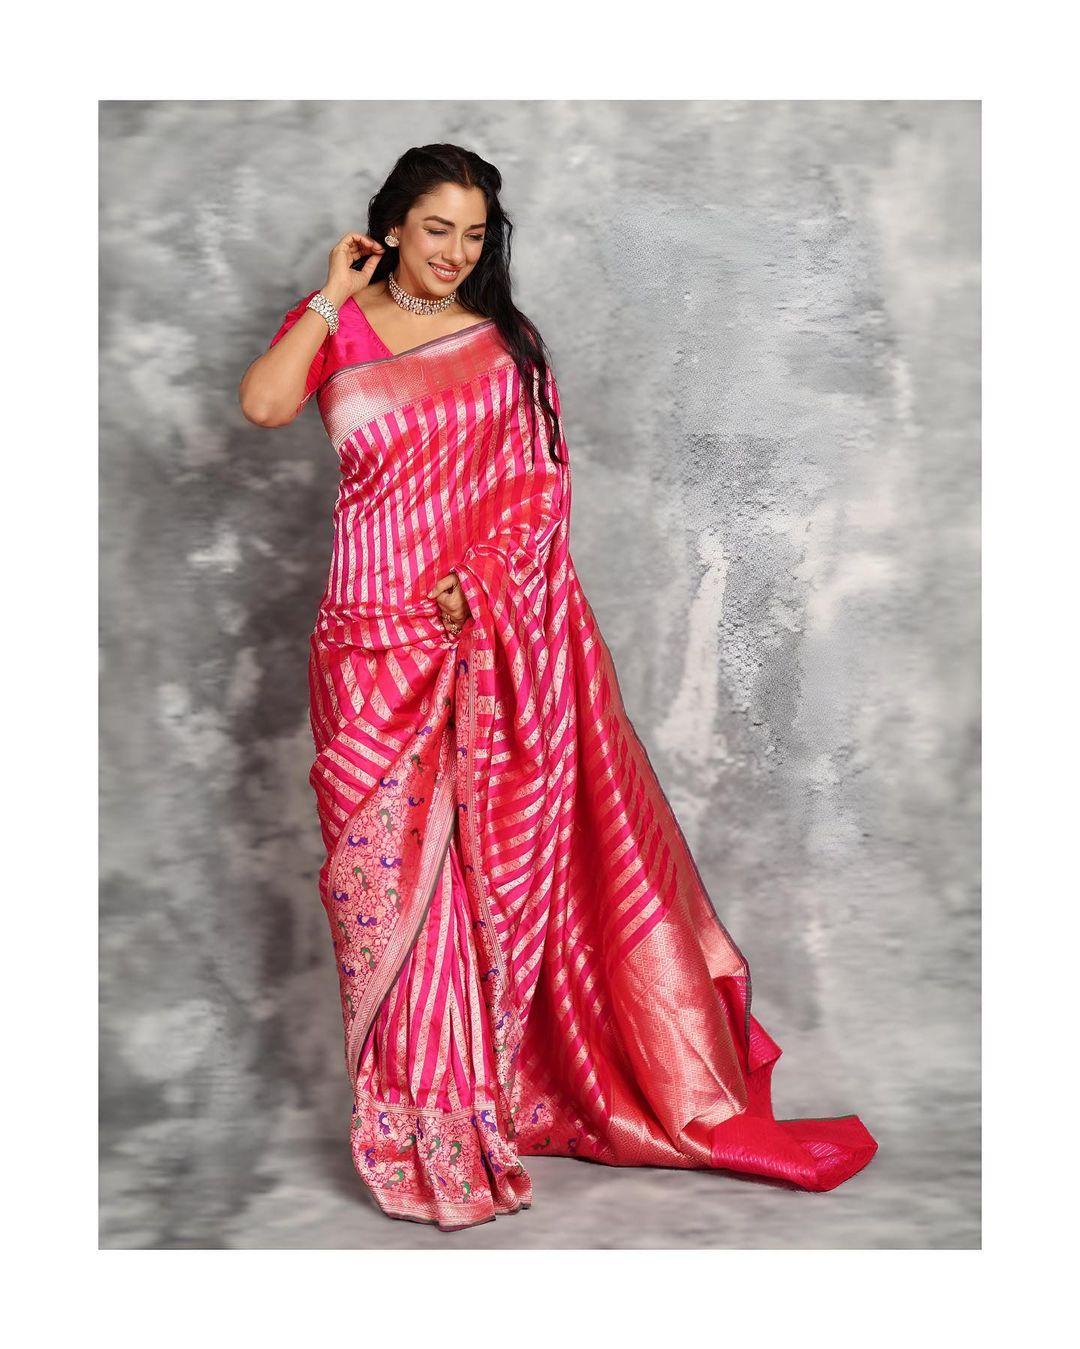 You're literally out of touch with the social media world if you haven't heard the 'Gulabi Saree' song. This song has crazily taken over the internet, and Rupali Ganguli's look is just perfect if you're planning to catch onto the trend